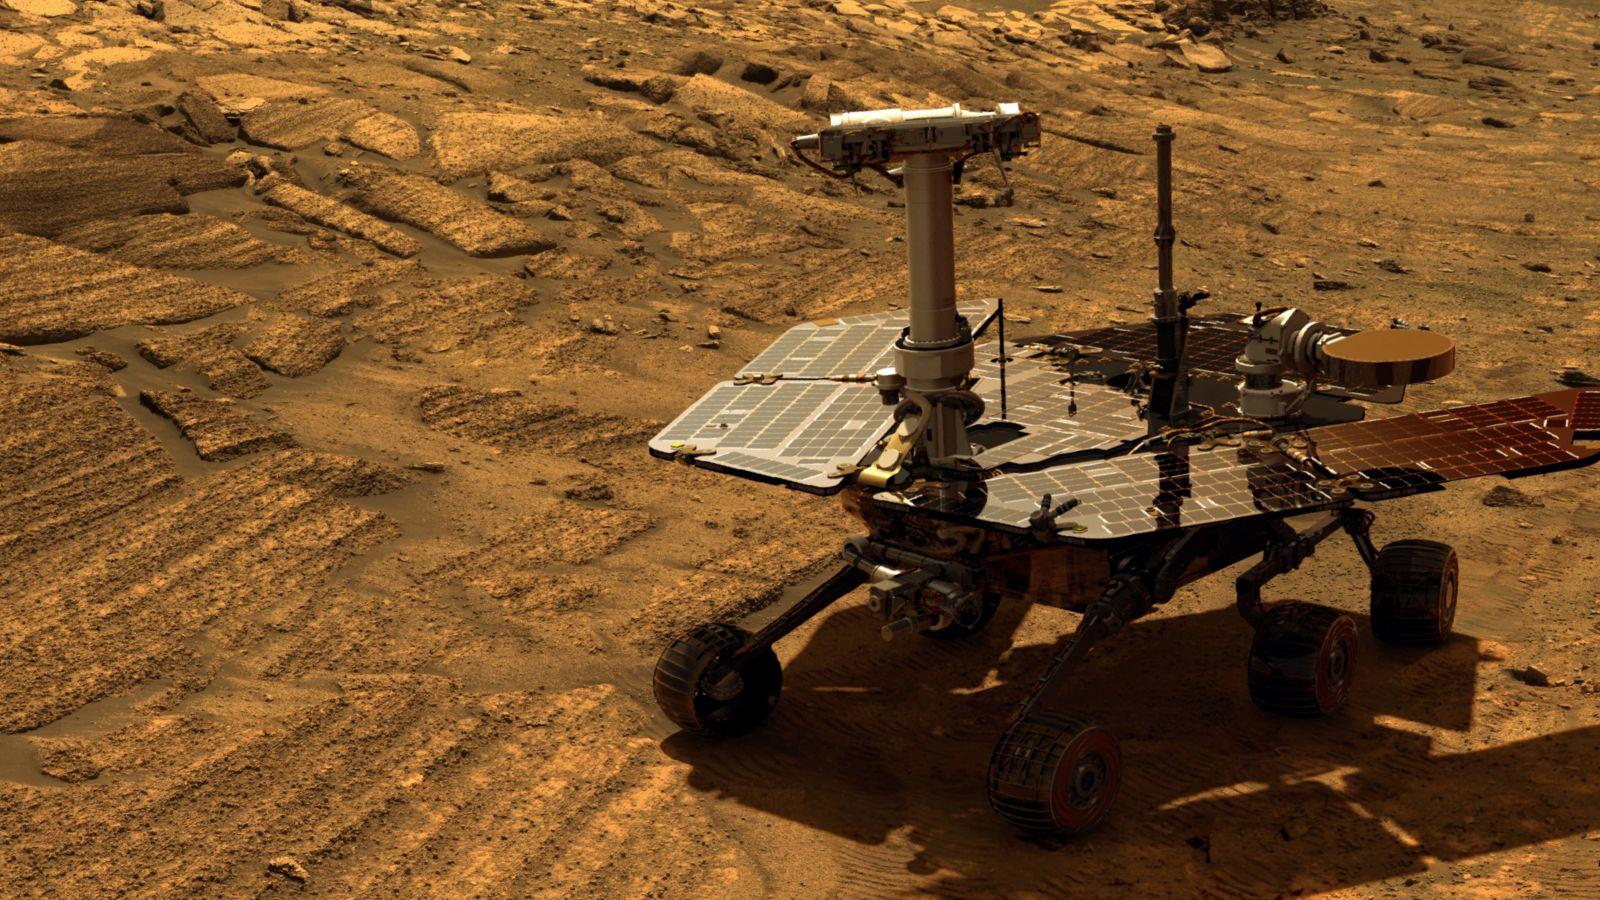 The Opportunity Rover Has Now Operated for 000 Martian Days